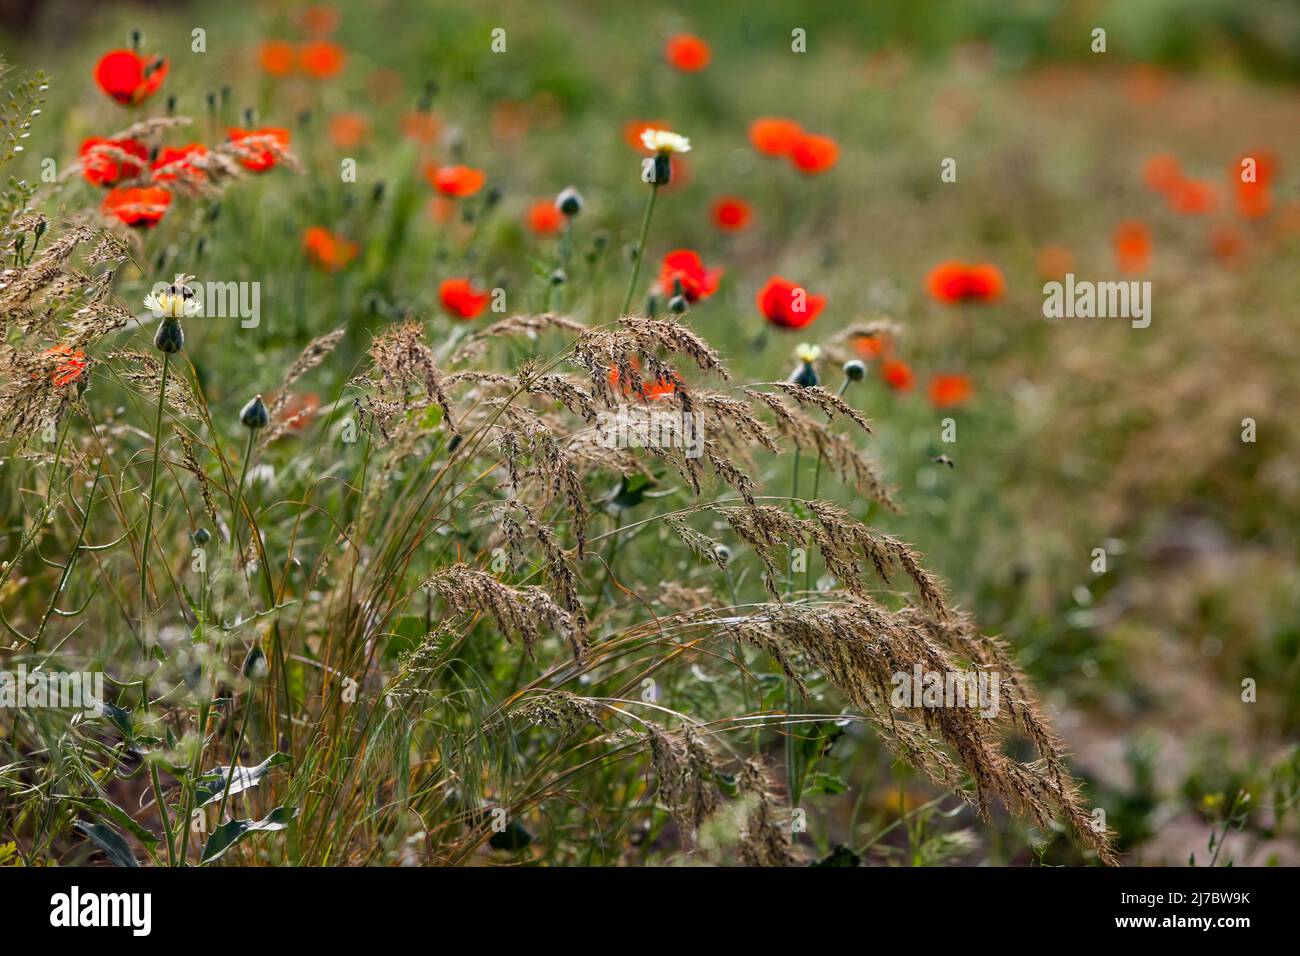 Flowering in nature. Wild red poppy flowers in focus only. Spikelet grass on foreground, blurred. Low depth-of-field. Stock Photo